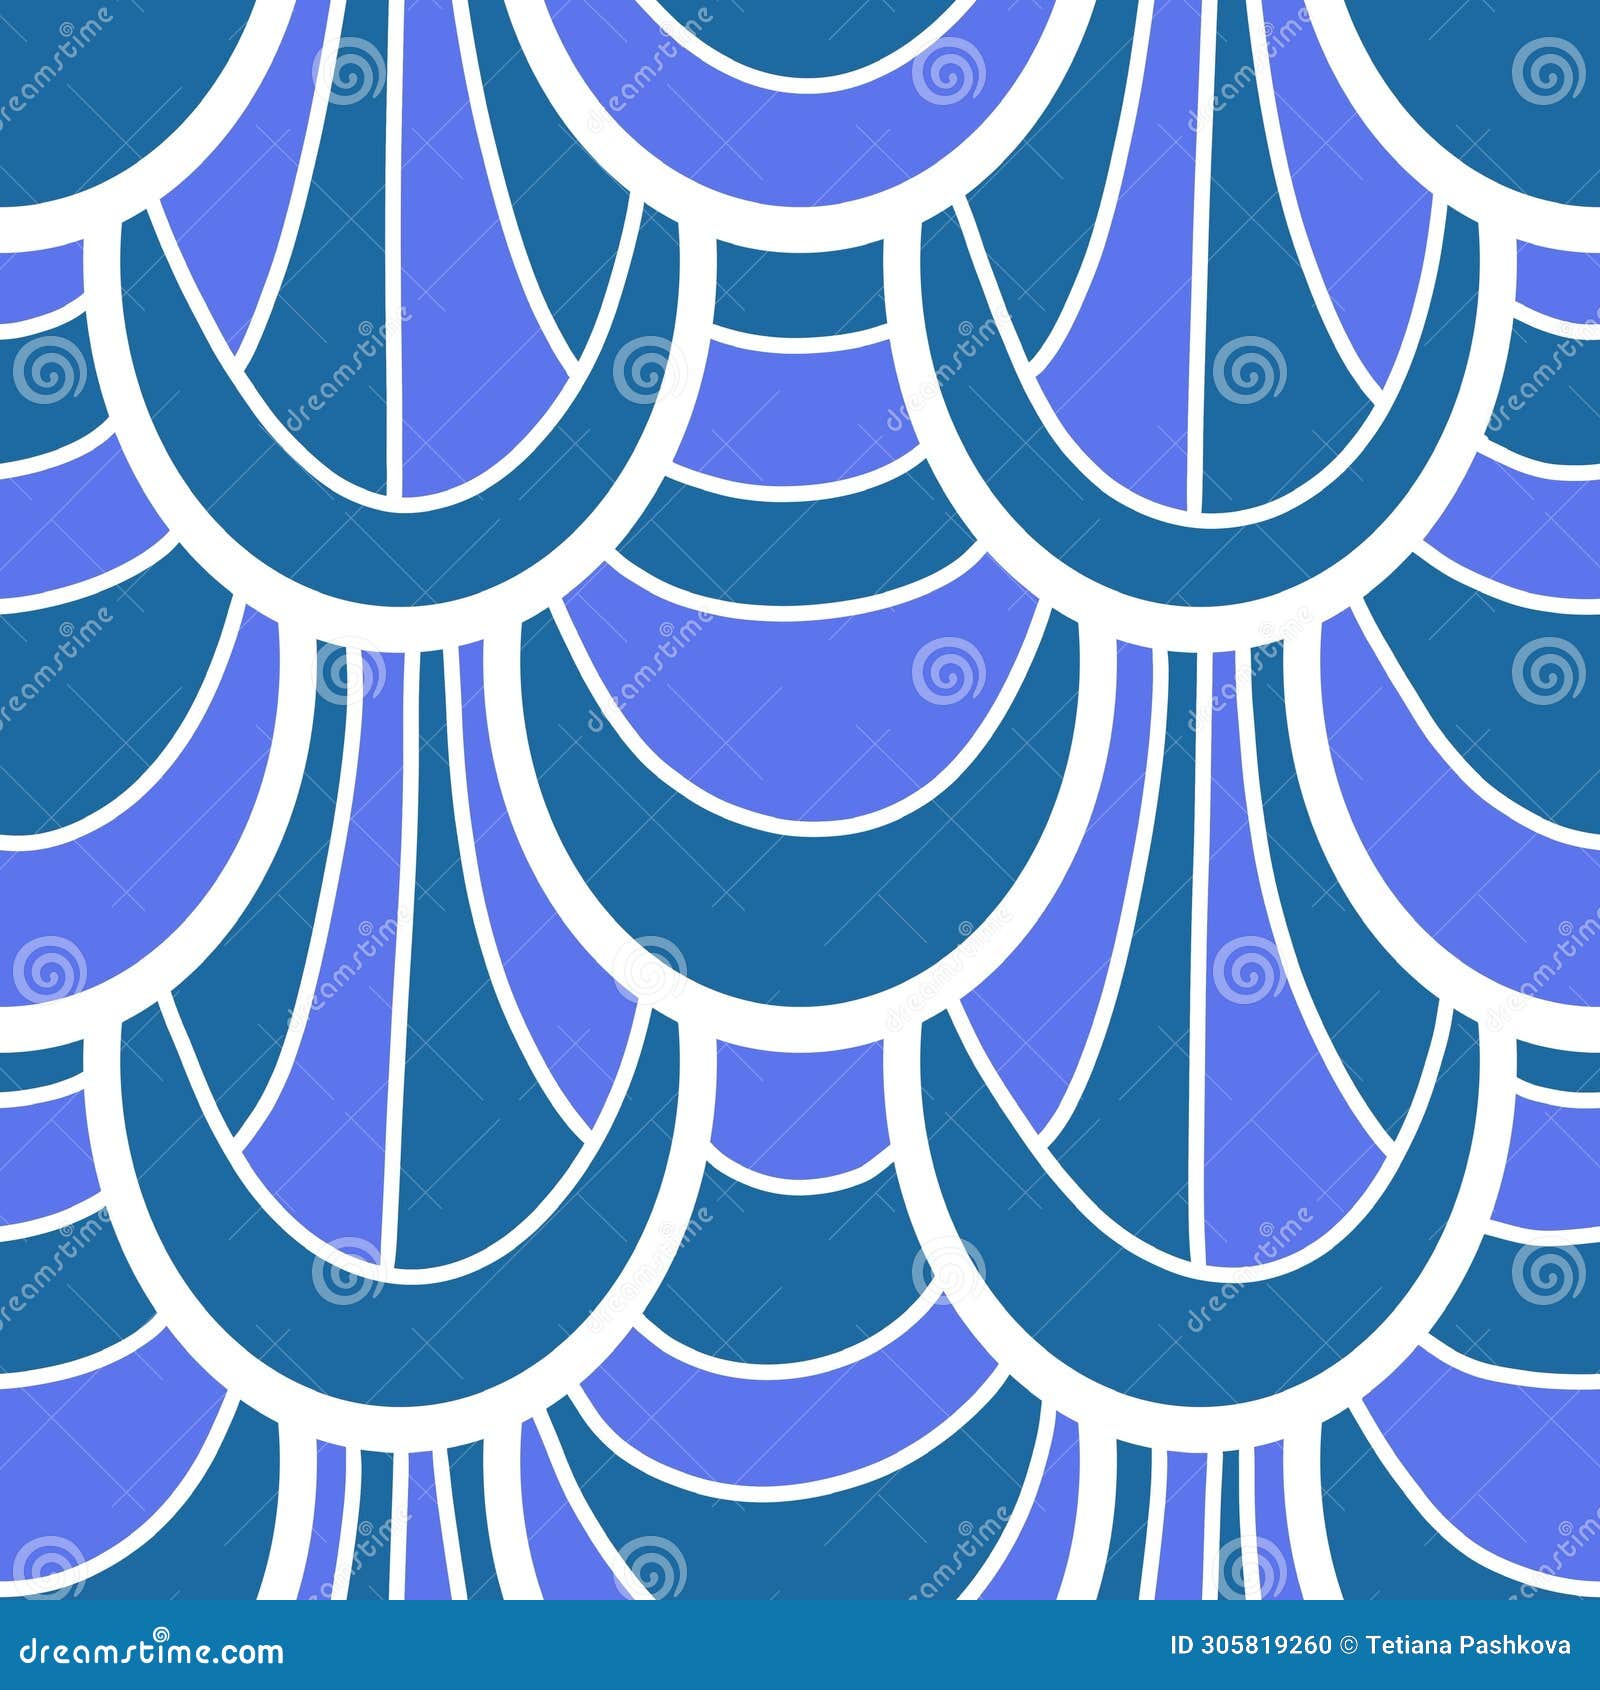 https://thumbs.dreamstime.com/z/abstract-cartoon-doodle-seamless-mermaid-fish-scales-pattern-wrapping-paper-fabrics-linens-kids-abstract-cartoon-305819260.jpg